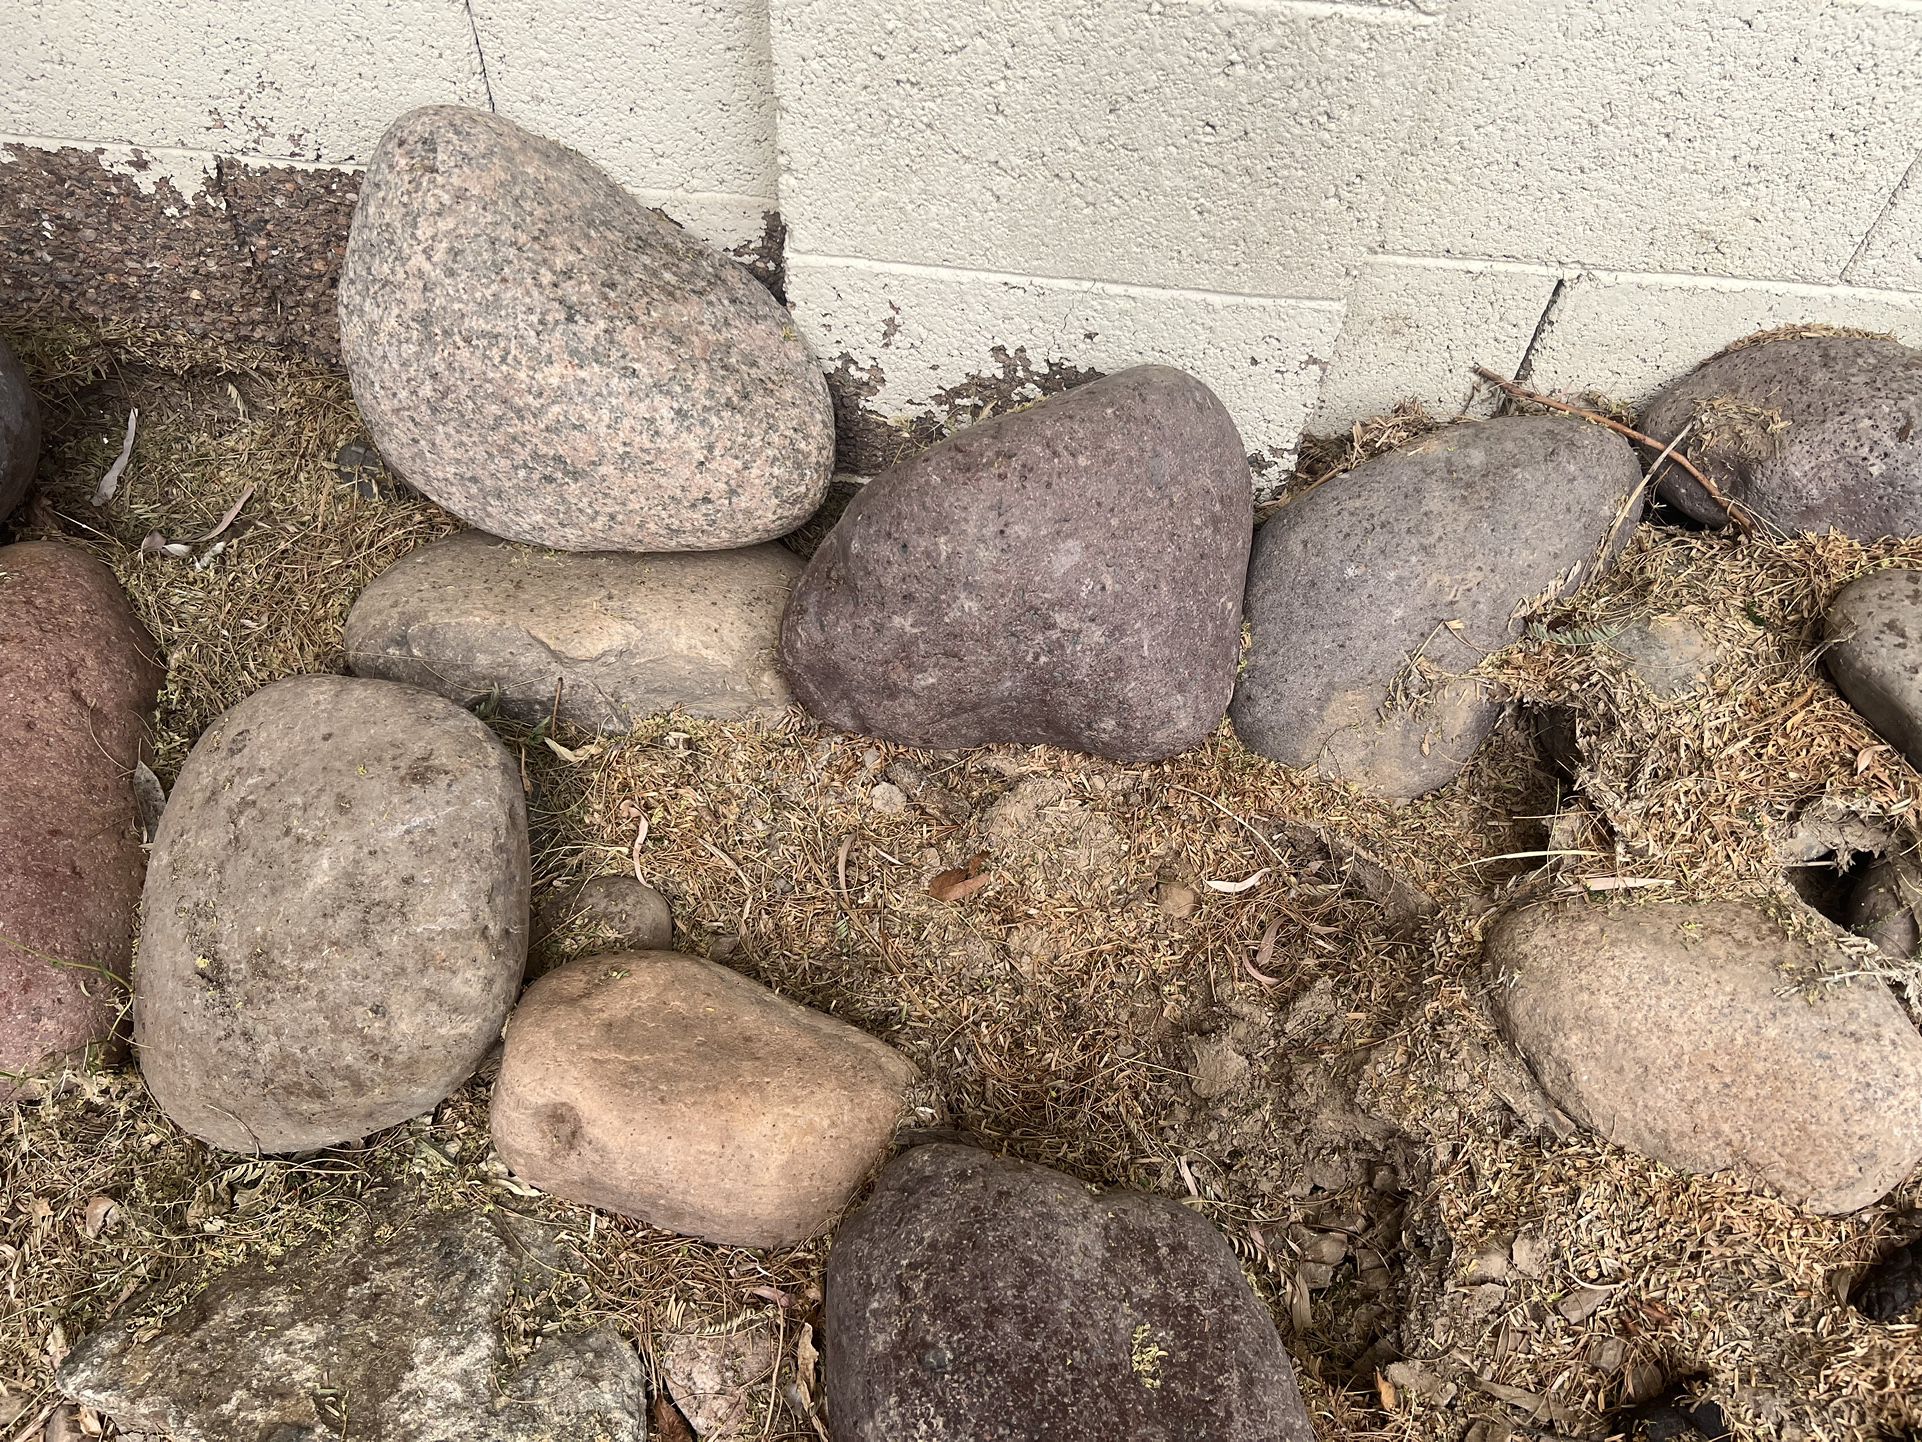 10-15 Inches Rock And Bigger Decoration Rock For Free